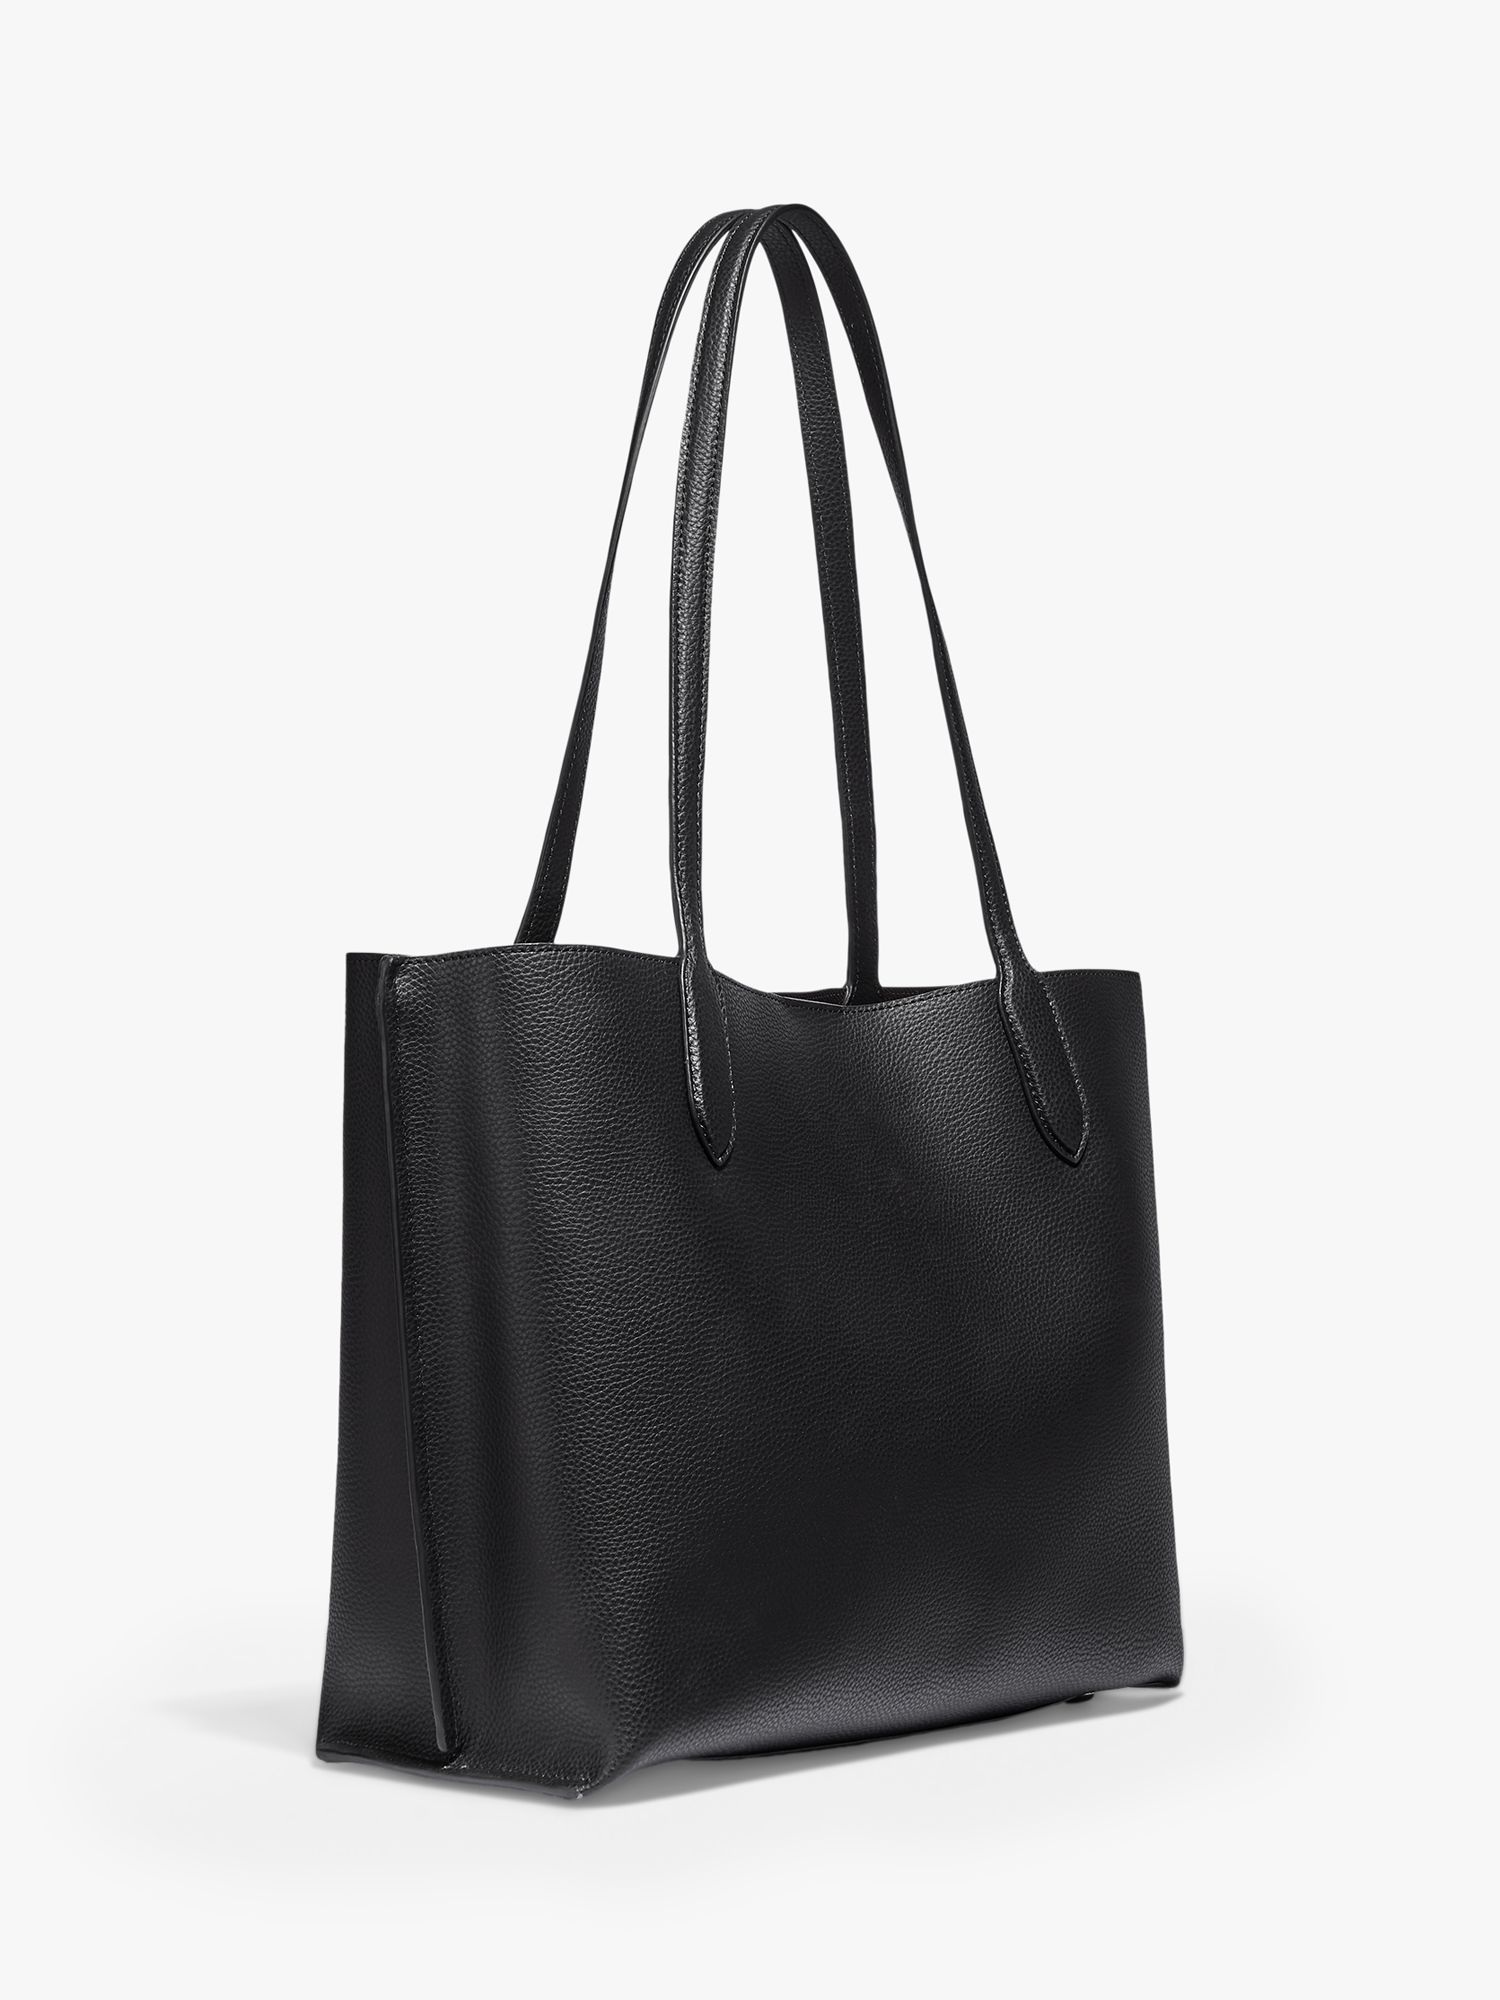 Coach Willow Leather Tote Bag, Black